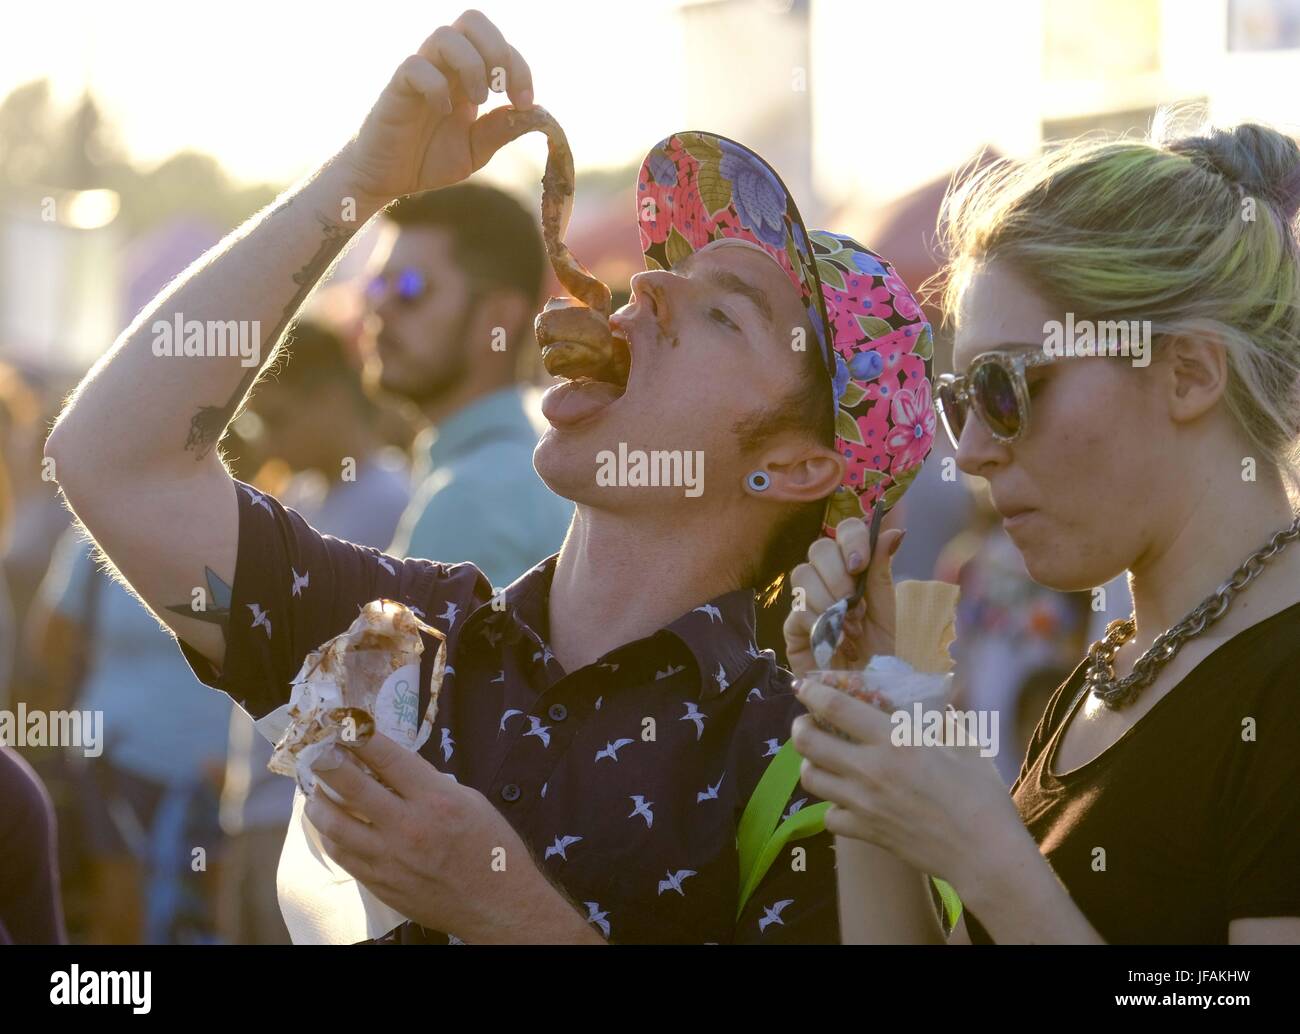 Arcadia, California, USA. 30th June, 2017. People enjoy the food at the '626 Night Market' on June 30, 2017 in Arcadia, California, an event that attracts all generations of the Chinese American community and showcases many San Gabriel Valley food vendors. Credit: Ringo Chiu/ZUMA Wire/Alamy Live News Stock Photo